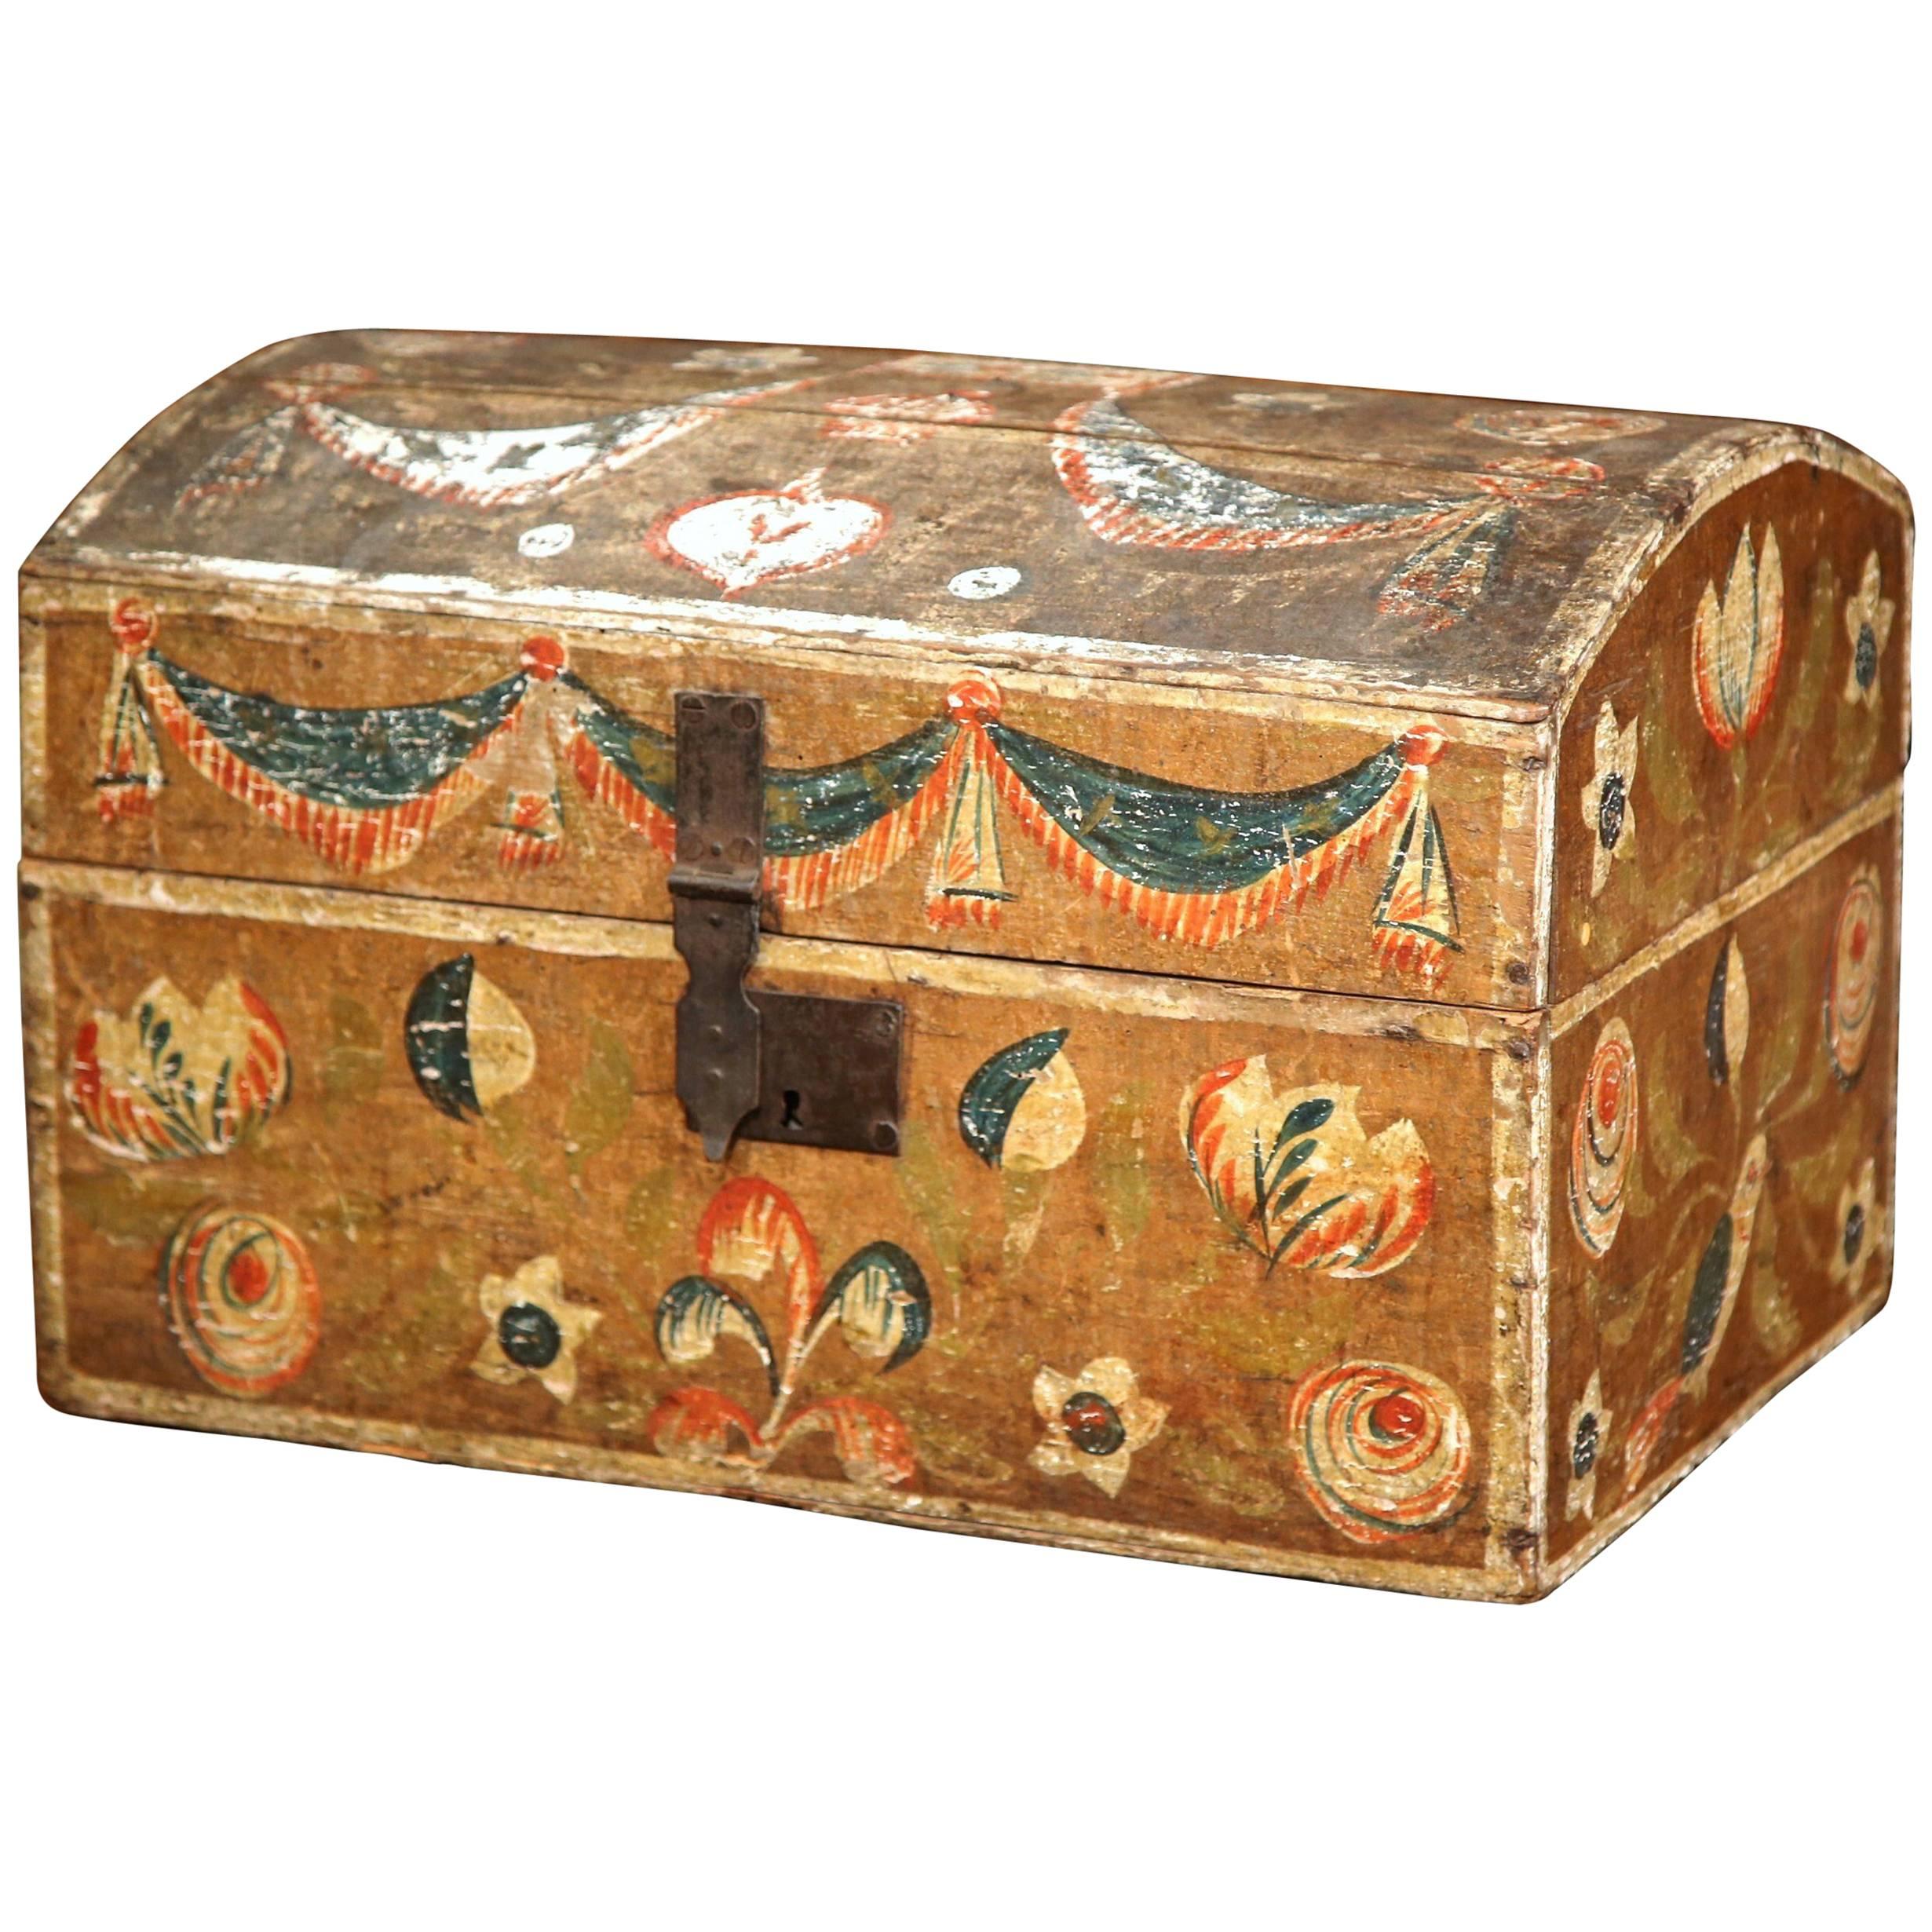 18th Century French Normandy Painted Decorative Box with Bird and Floral Motifs